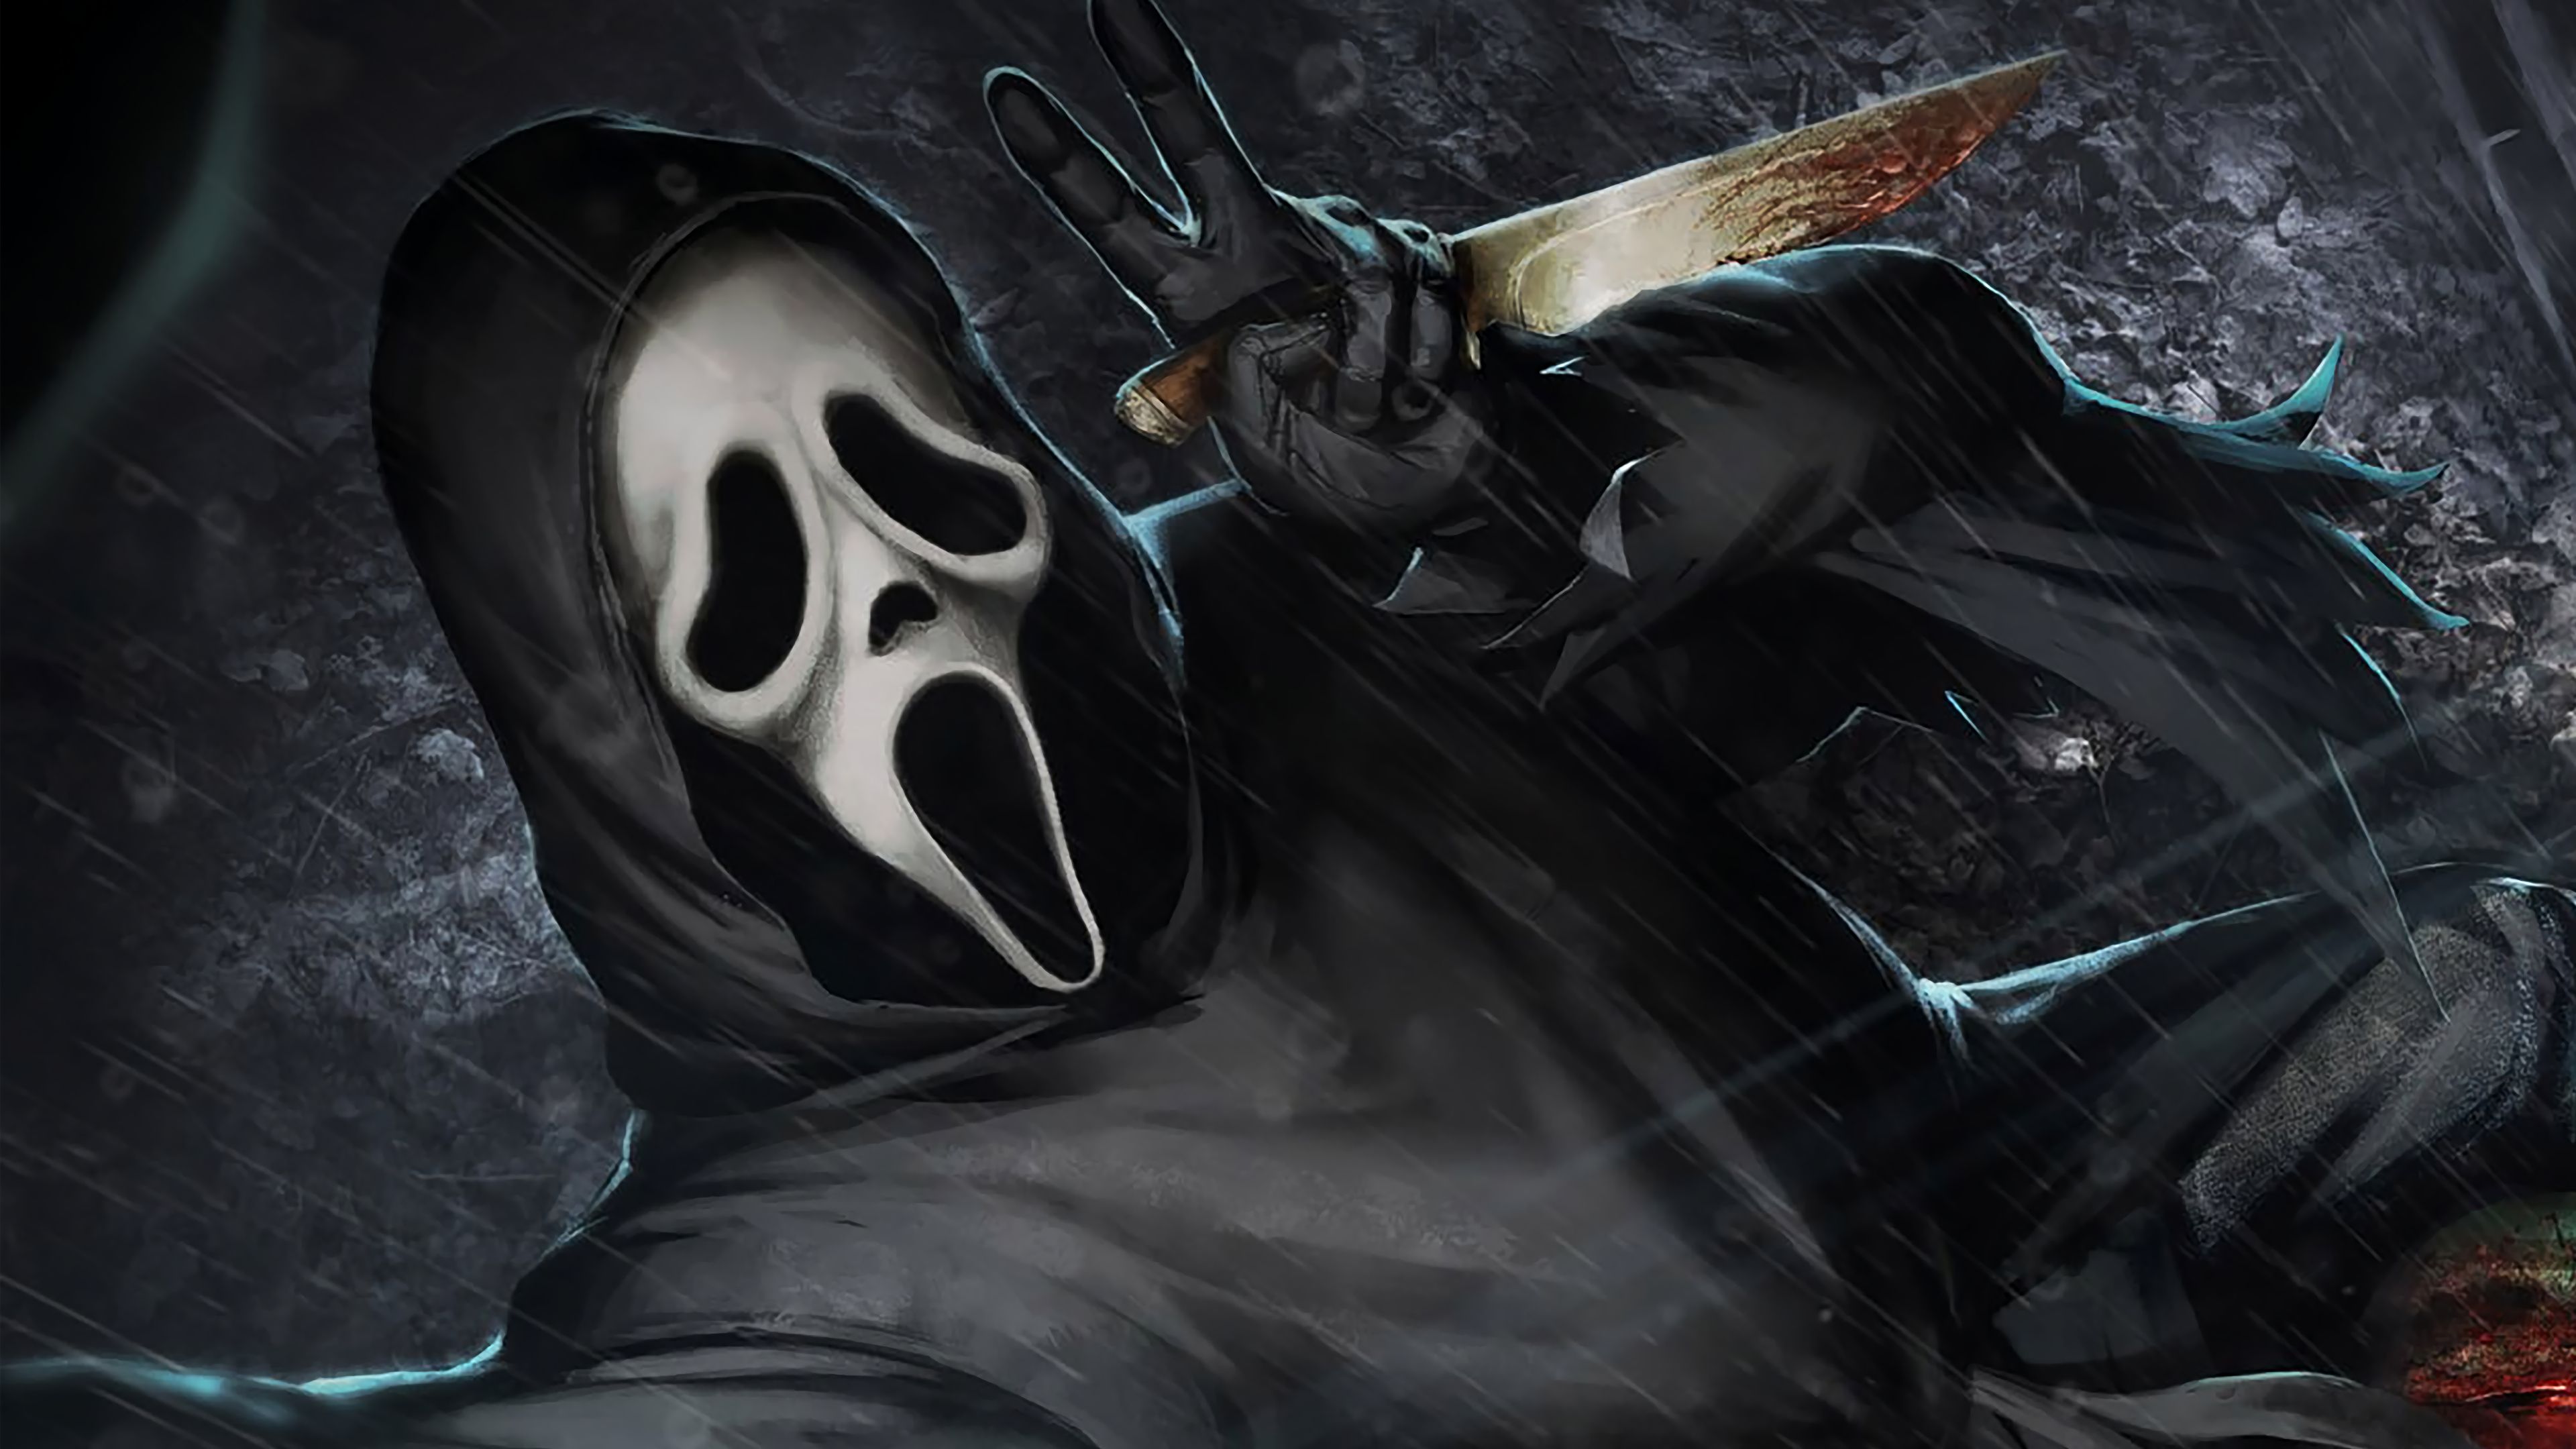 A scary looking man holding an axe - Ghostface